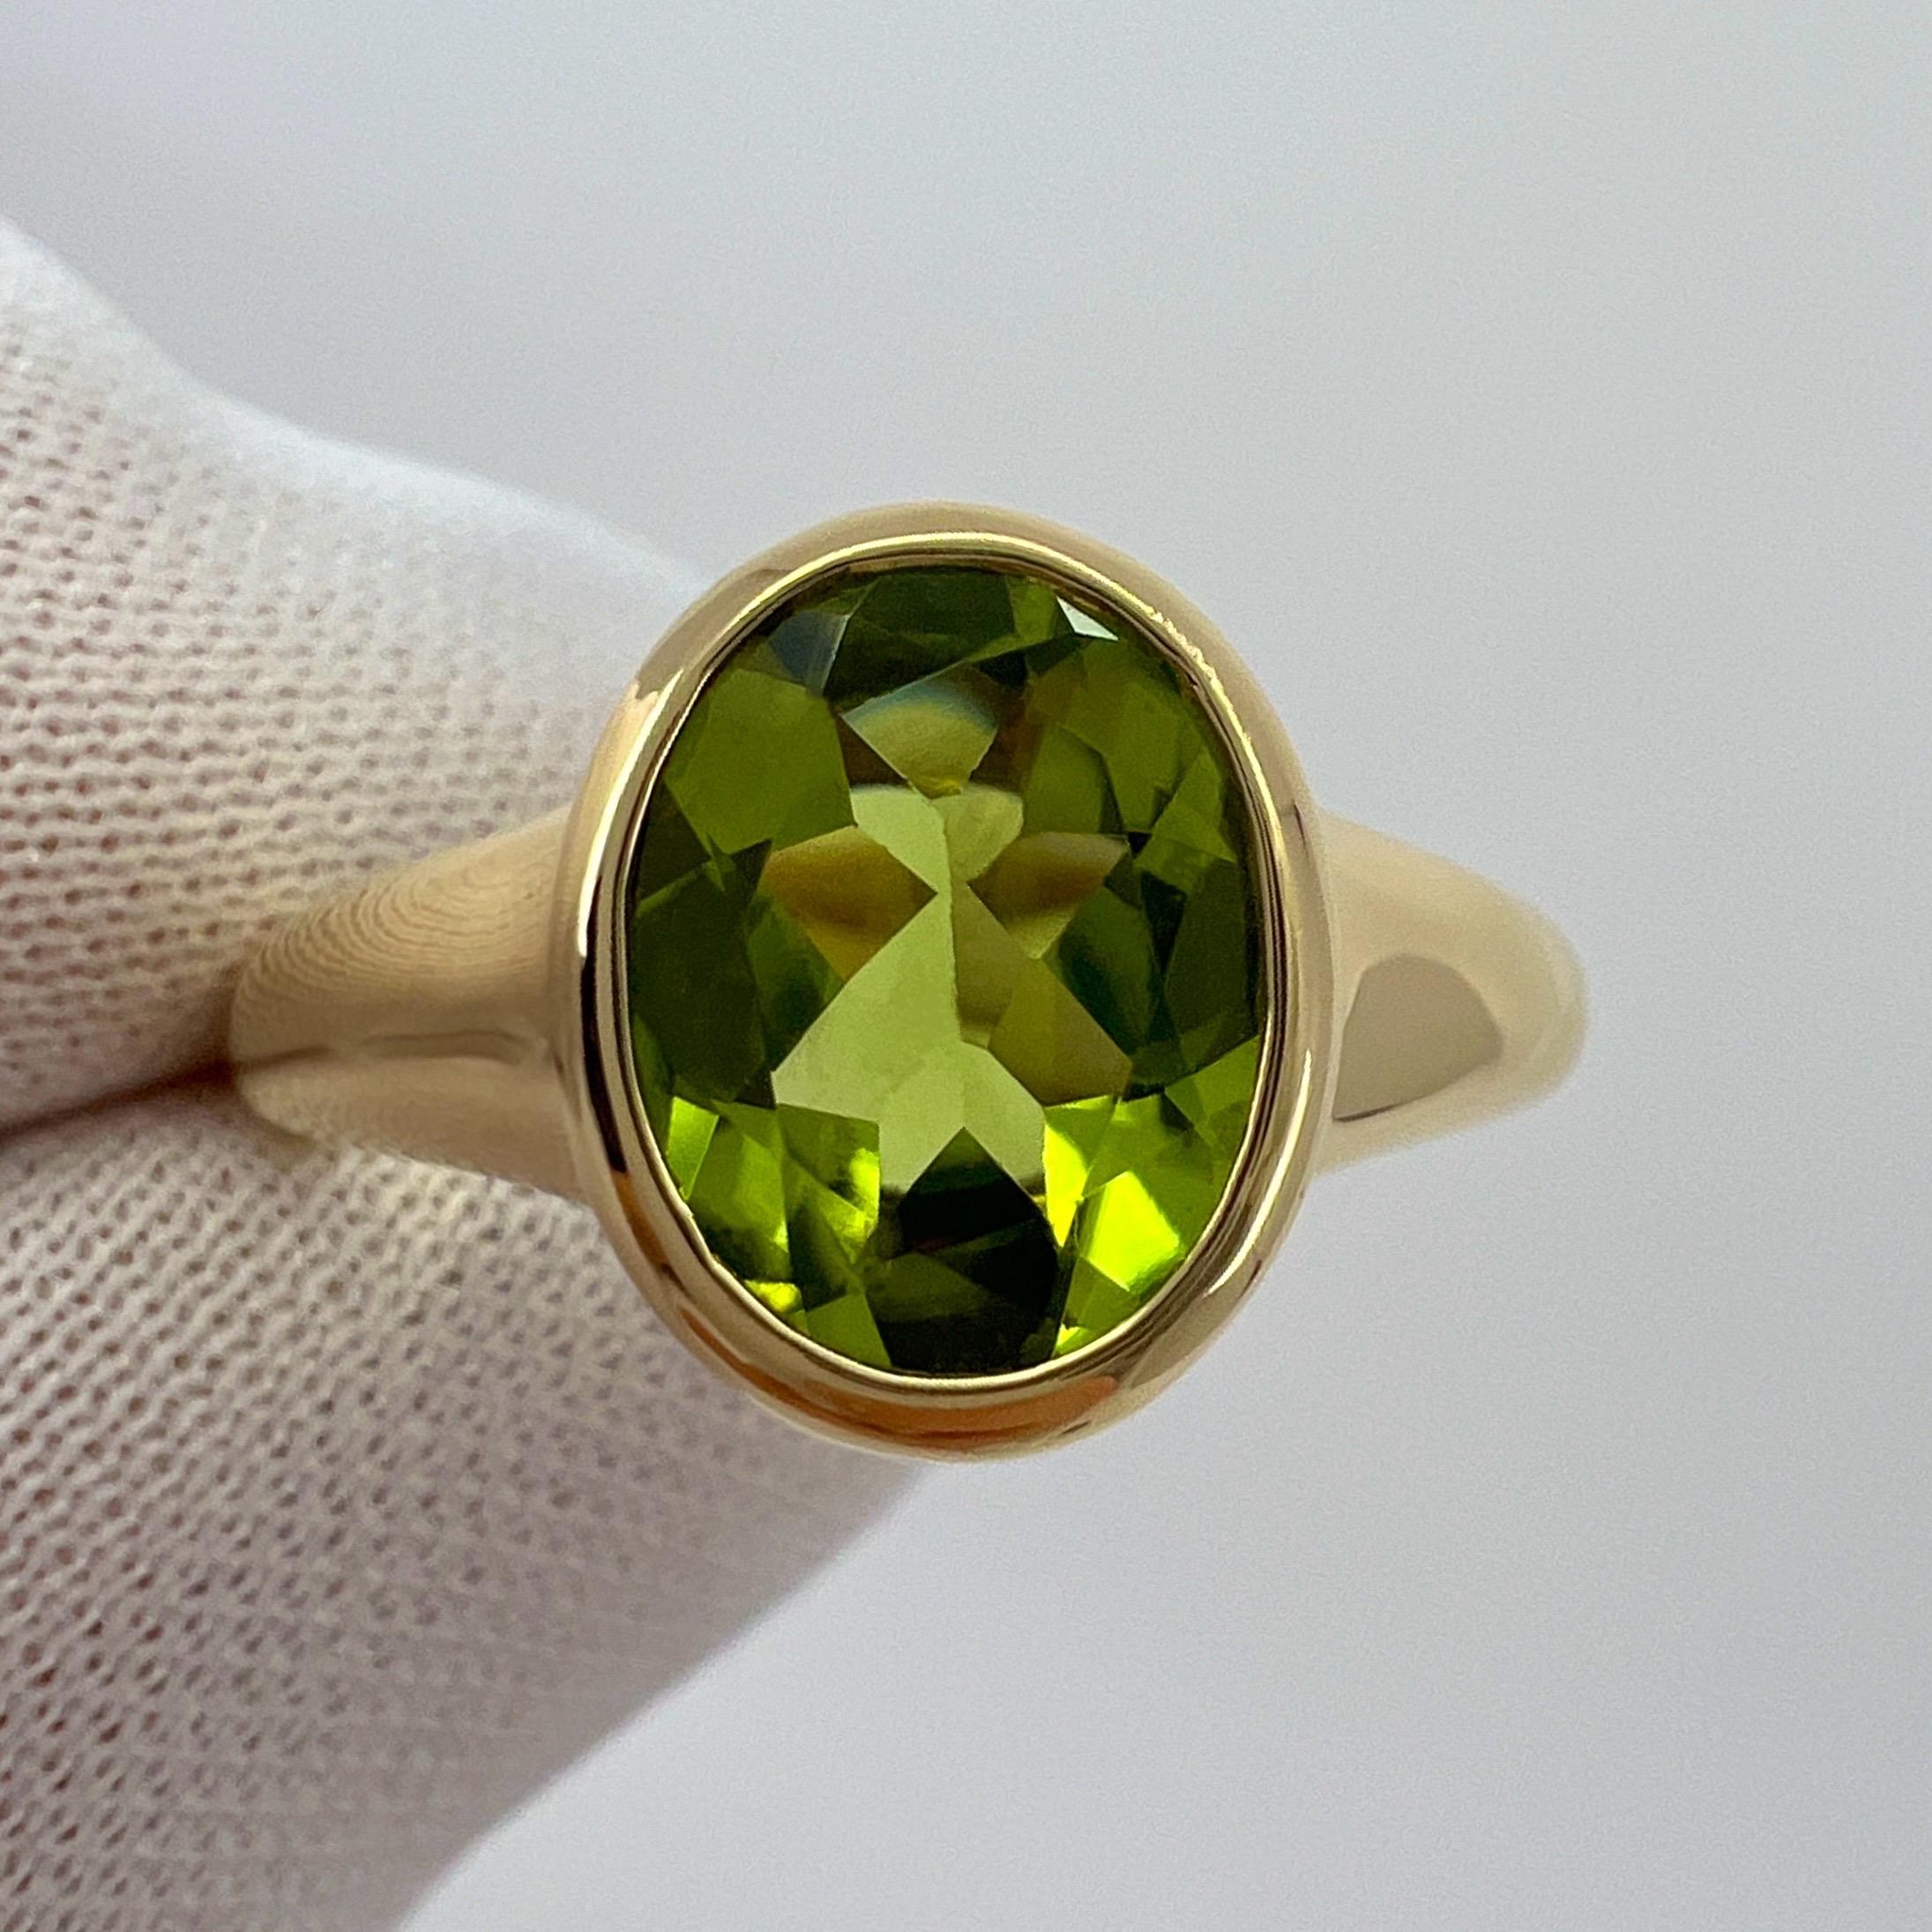 Vintage Bvlgari Oval Cut Peridot 18k Yellow Gold Signet Style Ring.

This rare Bvlgari pieces features a fine oval cut green peridot set in a fine 18k yellow gold ring. 
Gemstone measures 10x8mm with excellent colour and clarity. Fine jewellery